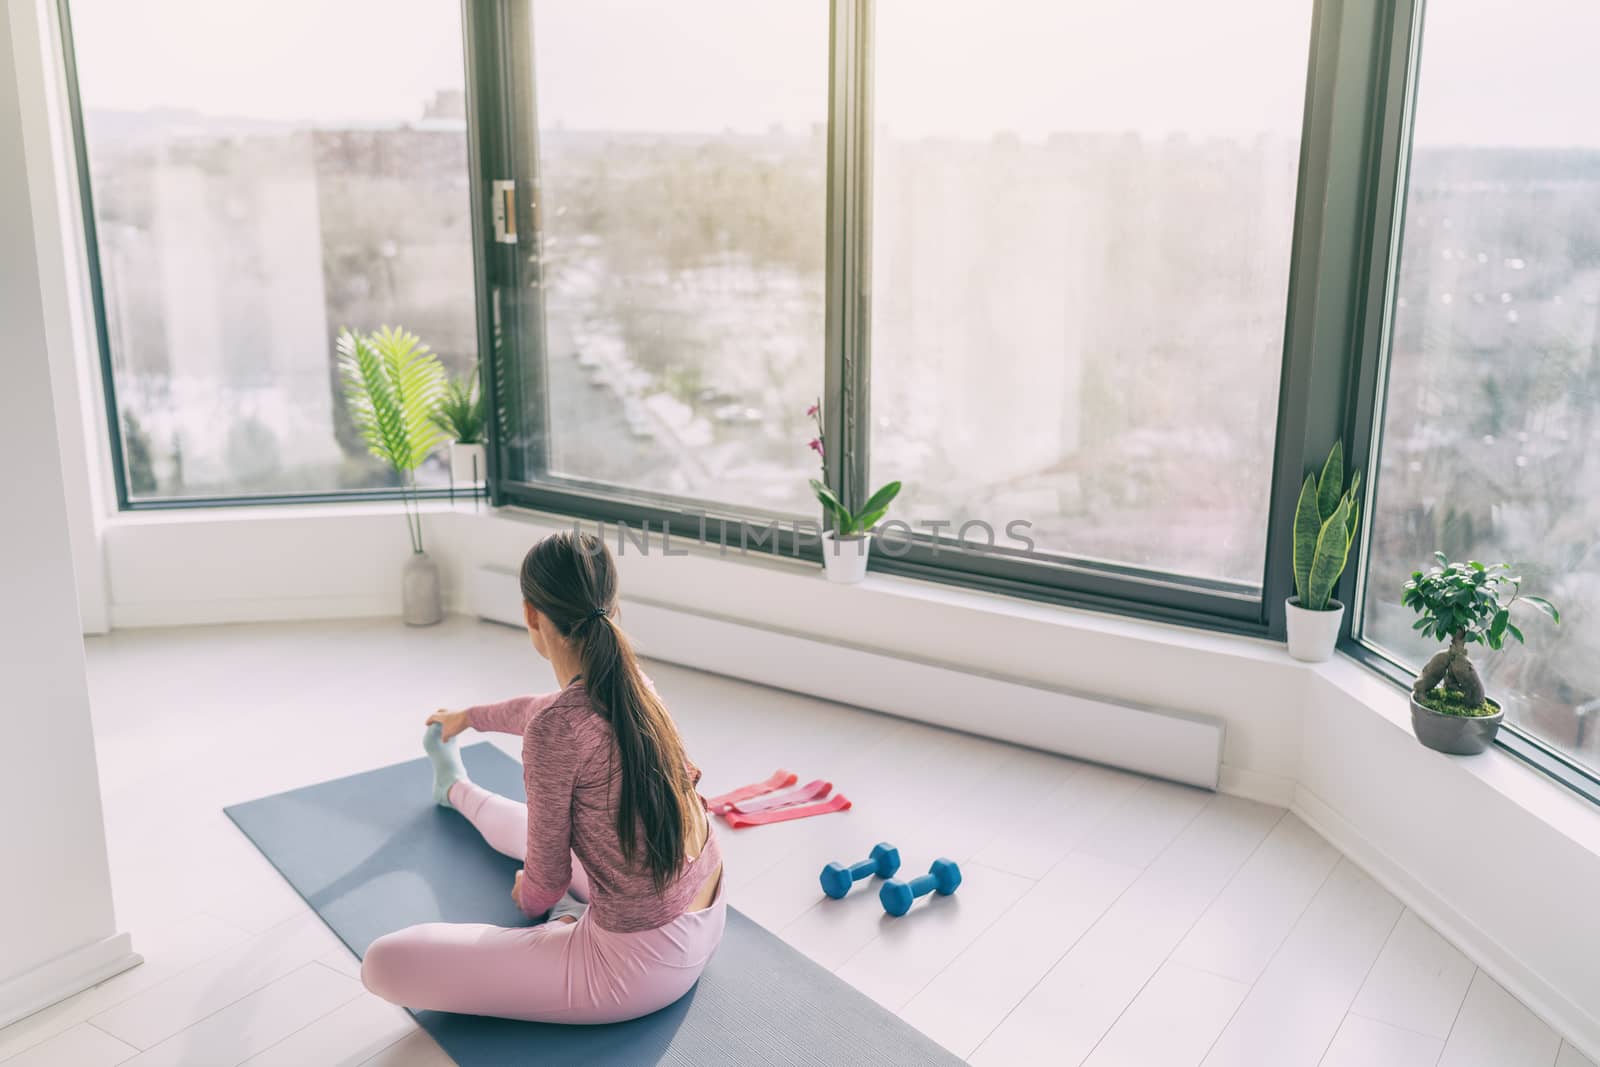 Home fitness yoga workout woman exercising at home stretching legs warm up training. Fit girl working out in morning sunlight in living room of apartment house.